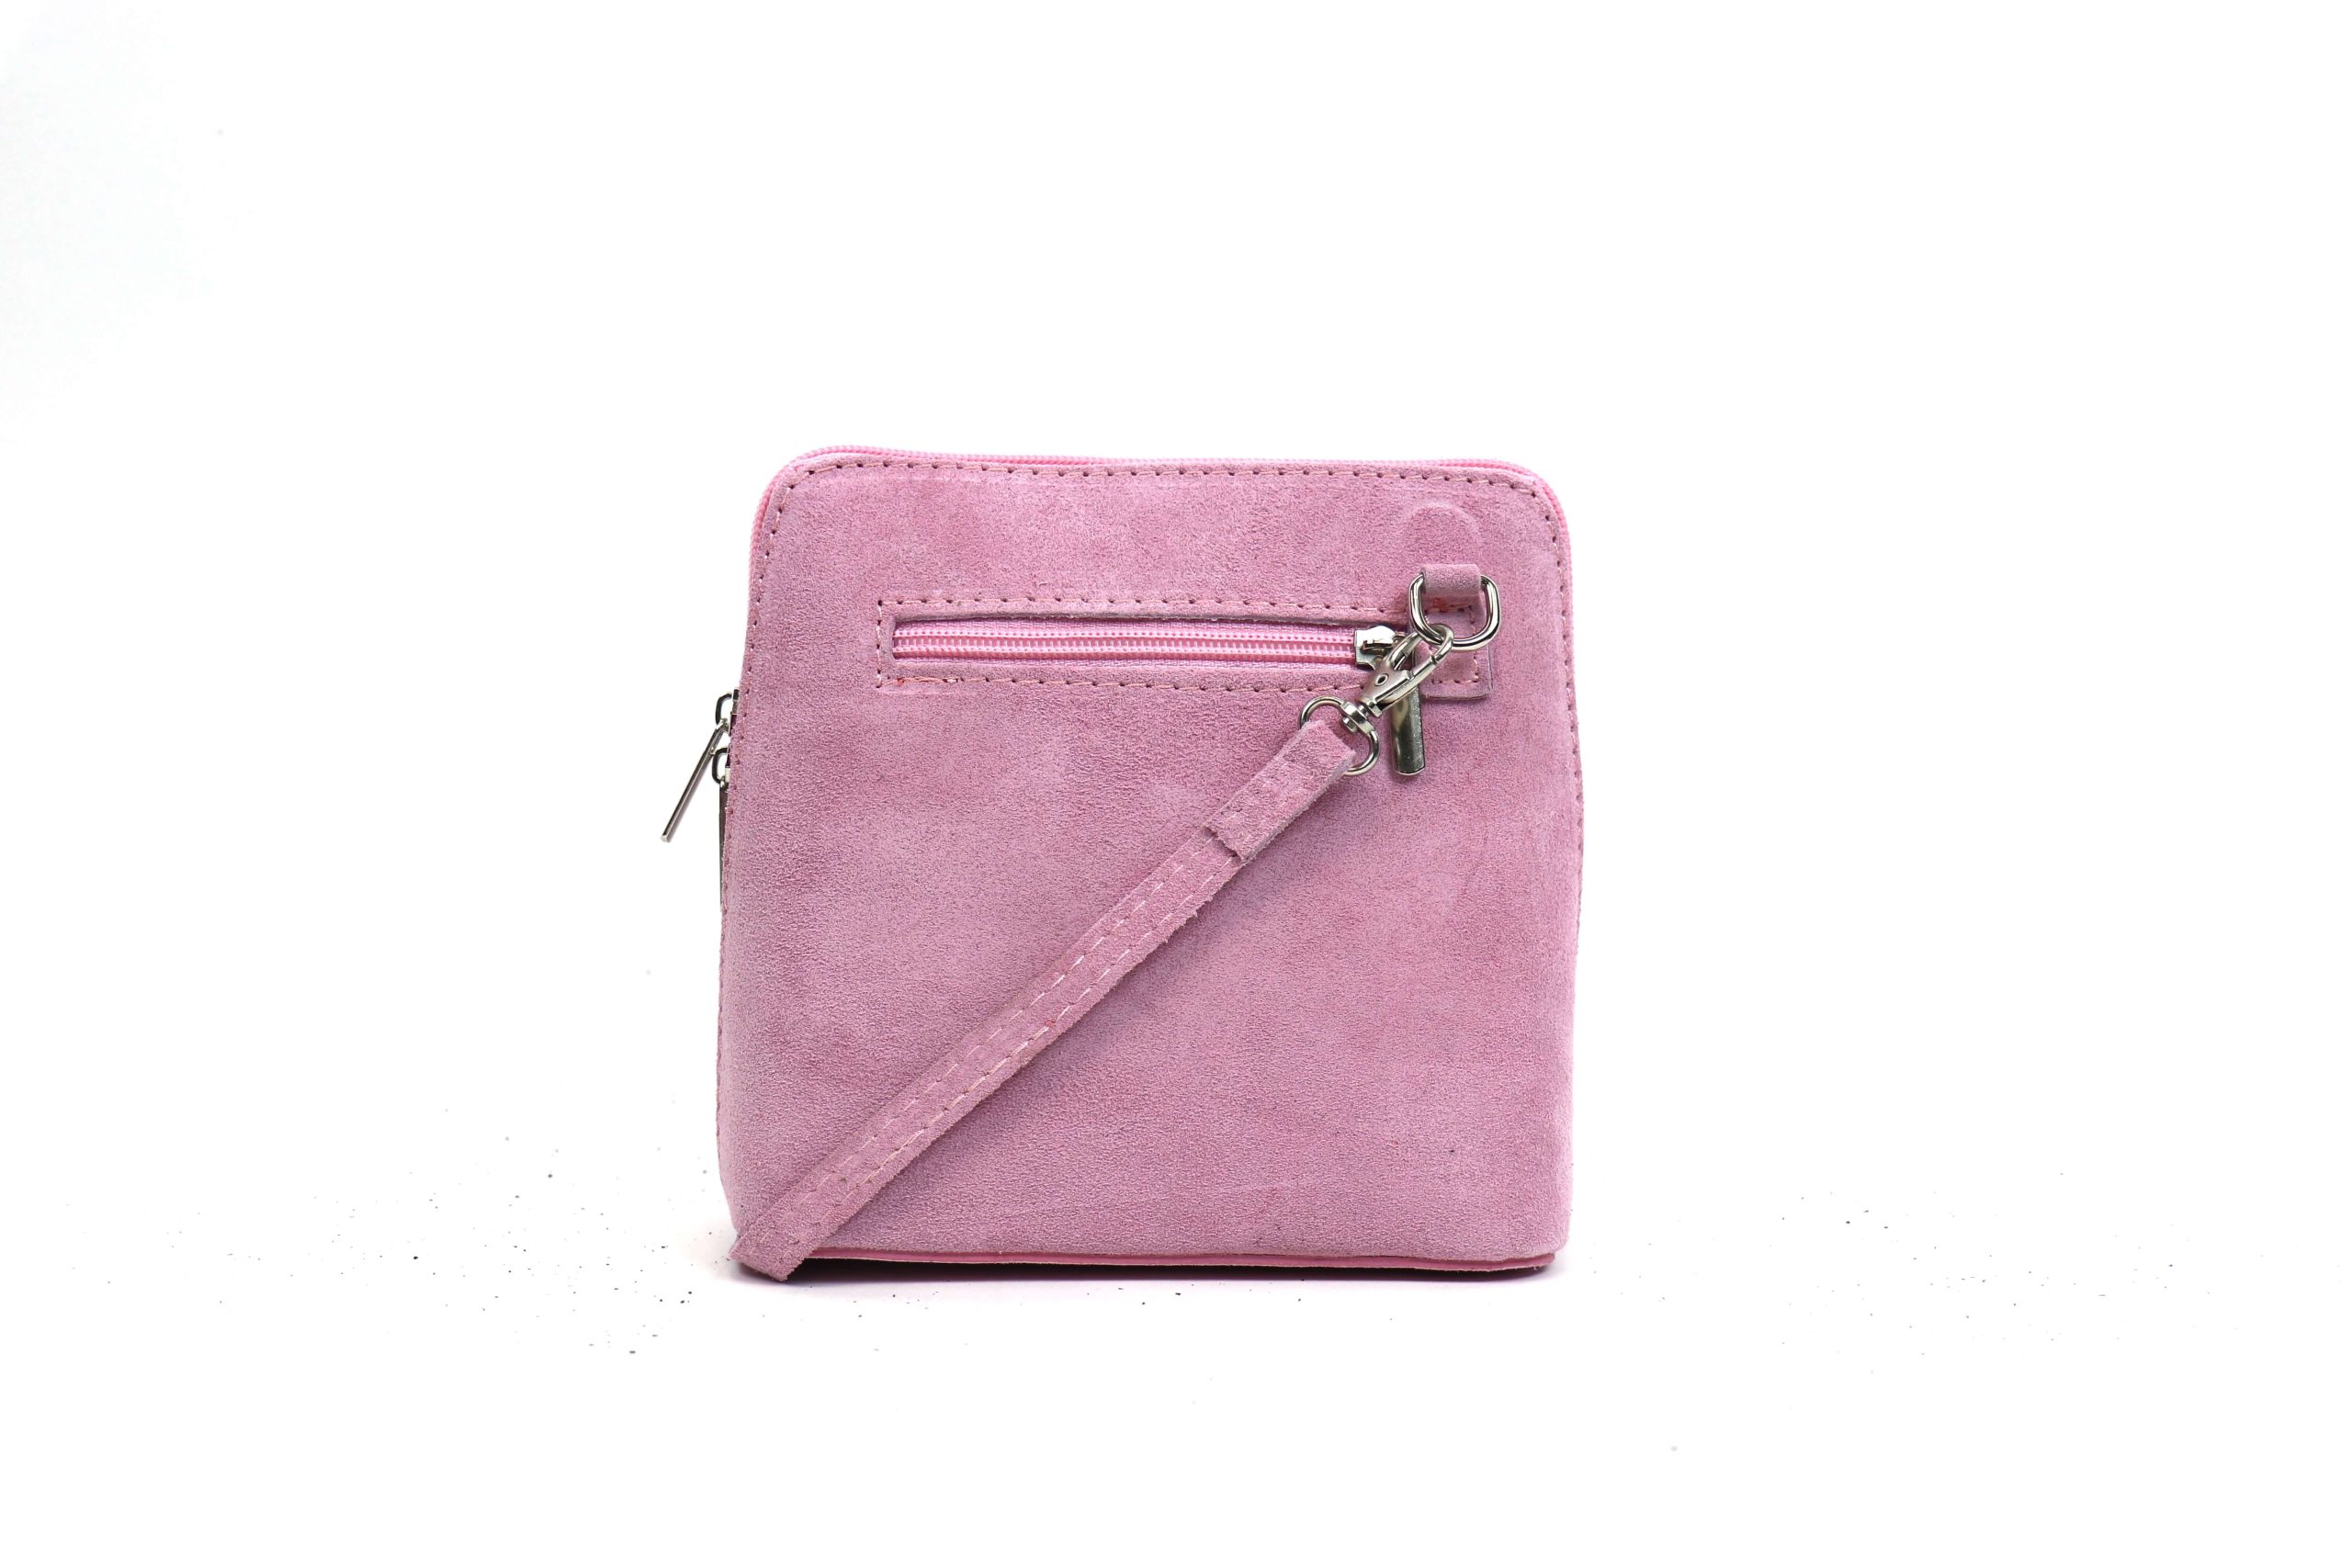 Emmy London Natasha Clutch in Blush Suede - Kate Middleton Bags - Kate's  Closet